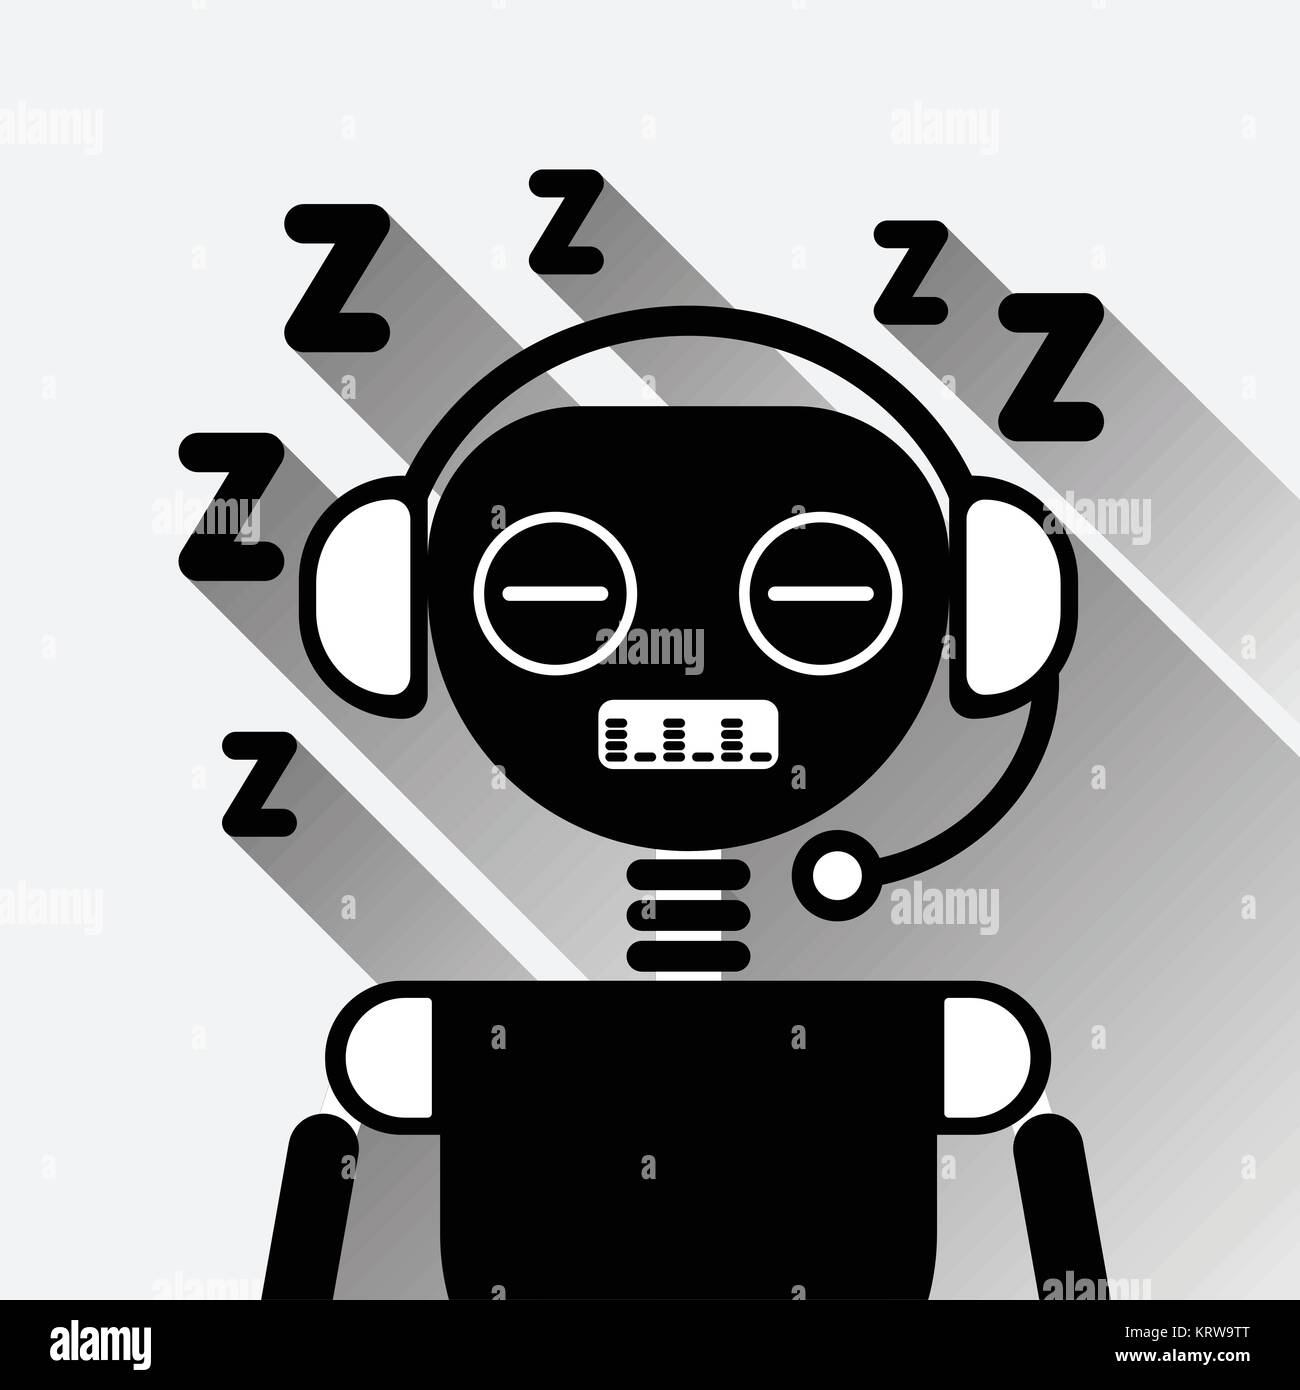 Chatbot Tired Sleep Icon Concept Black Chat Bot Or Chatterbot Service Of Online Support Technology Stock Vector